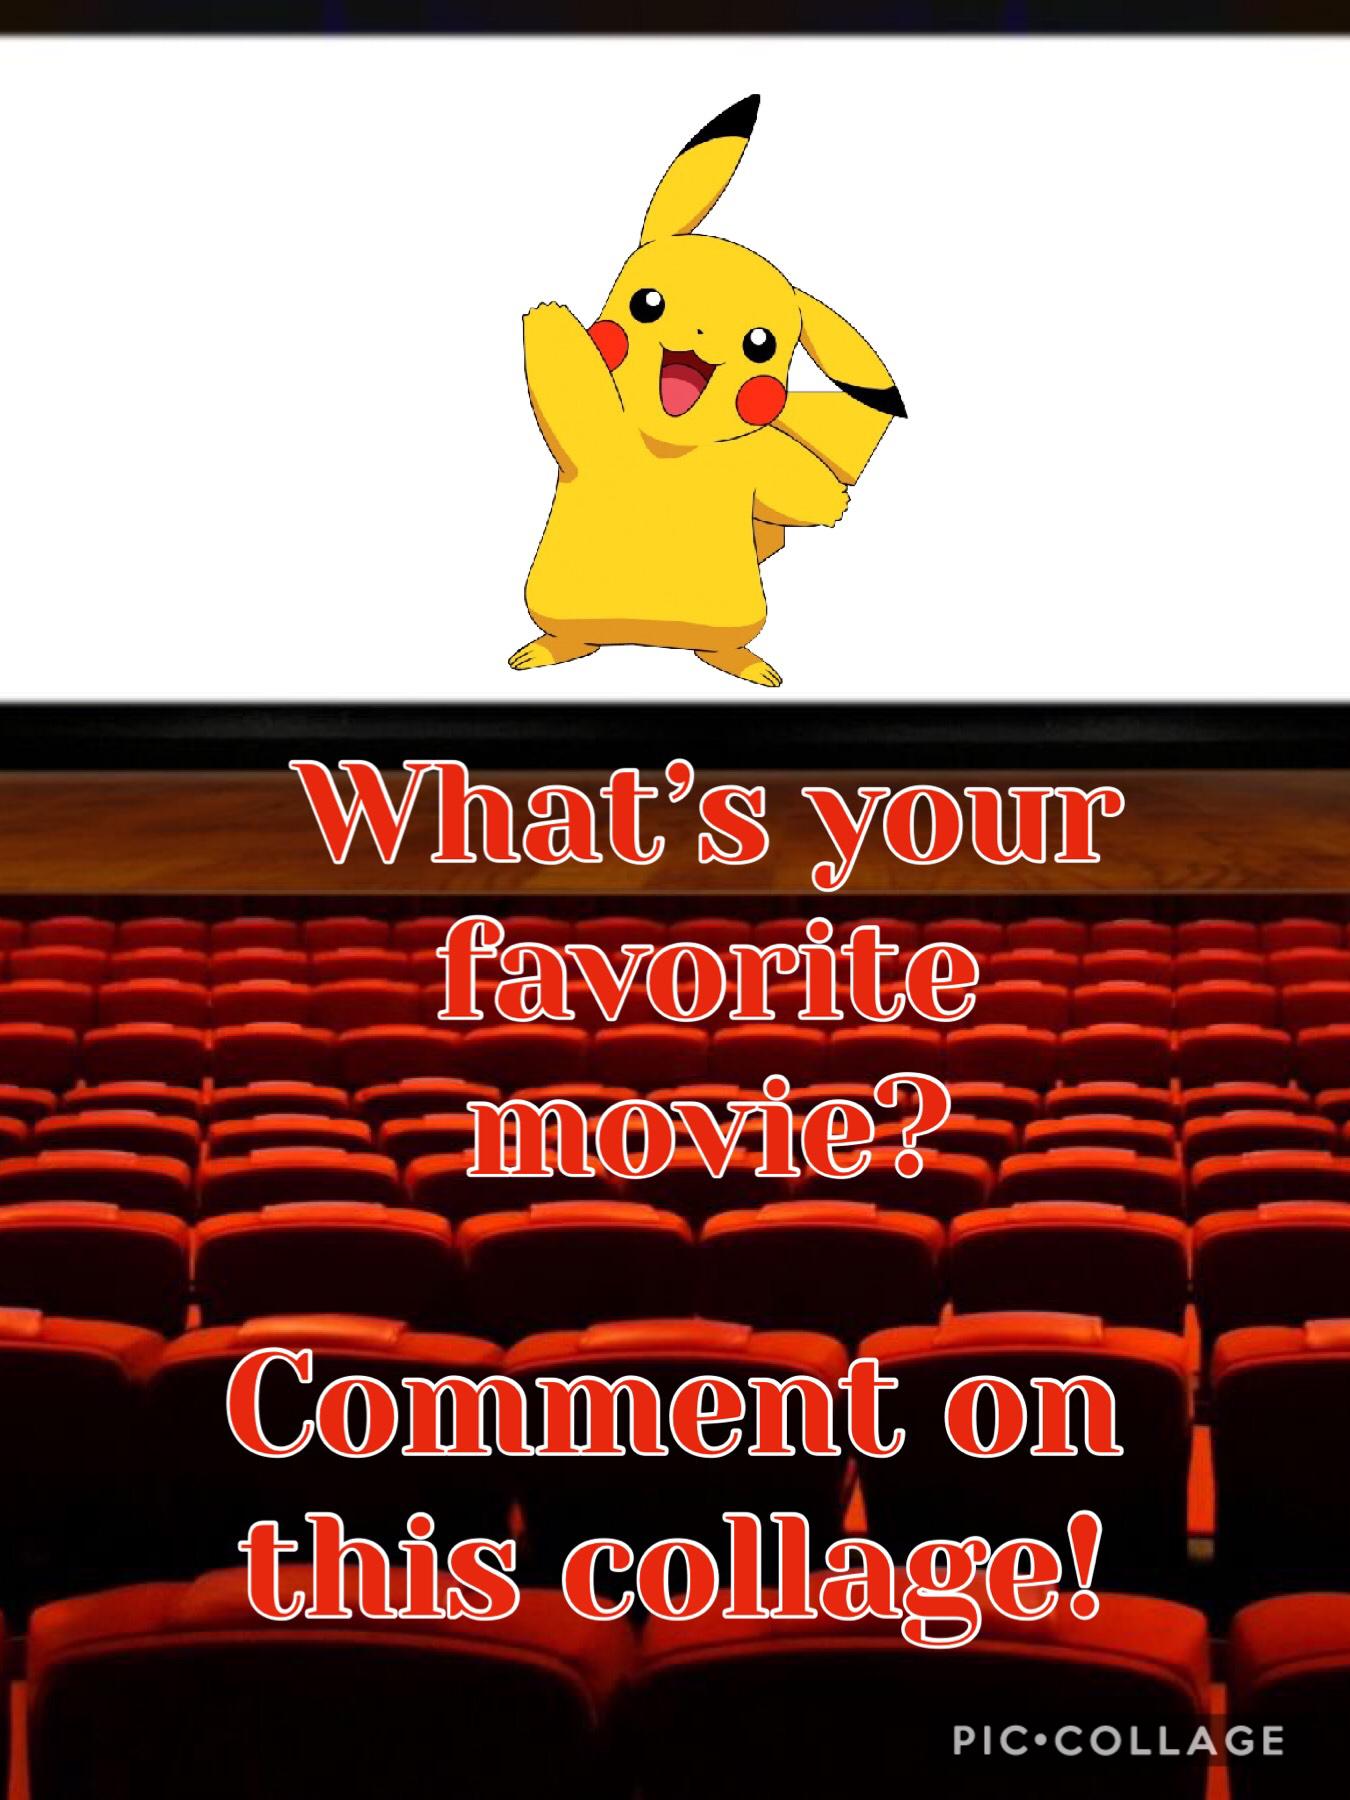 Comment your favorite movie!